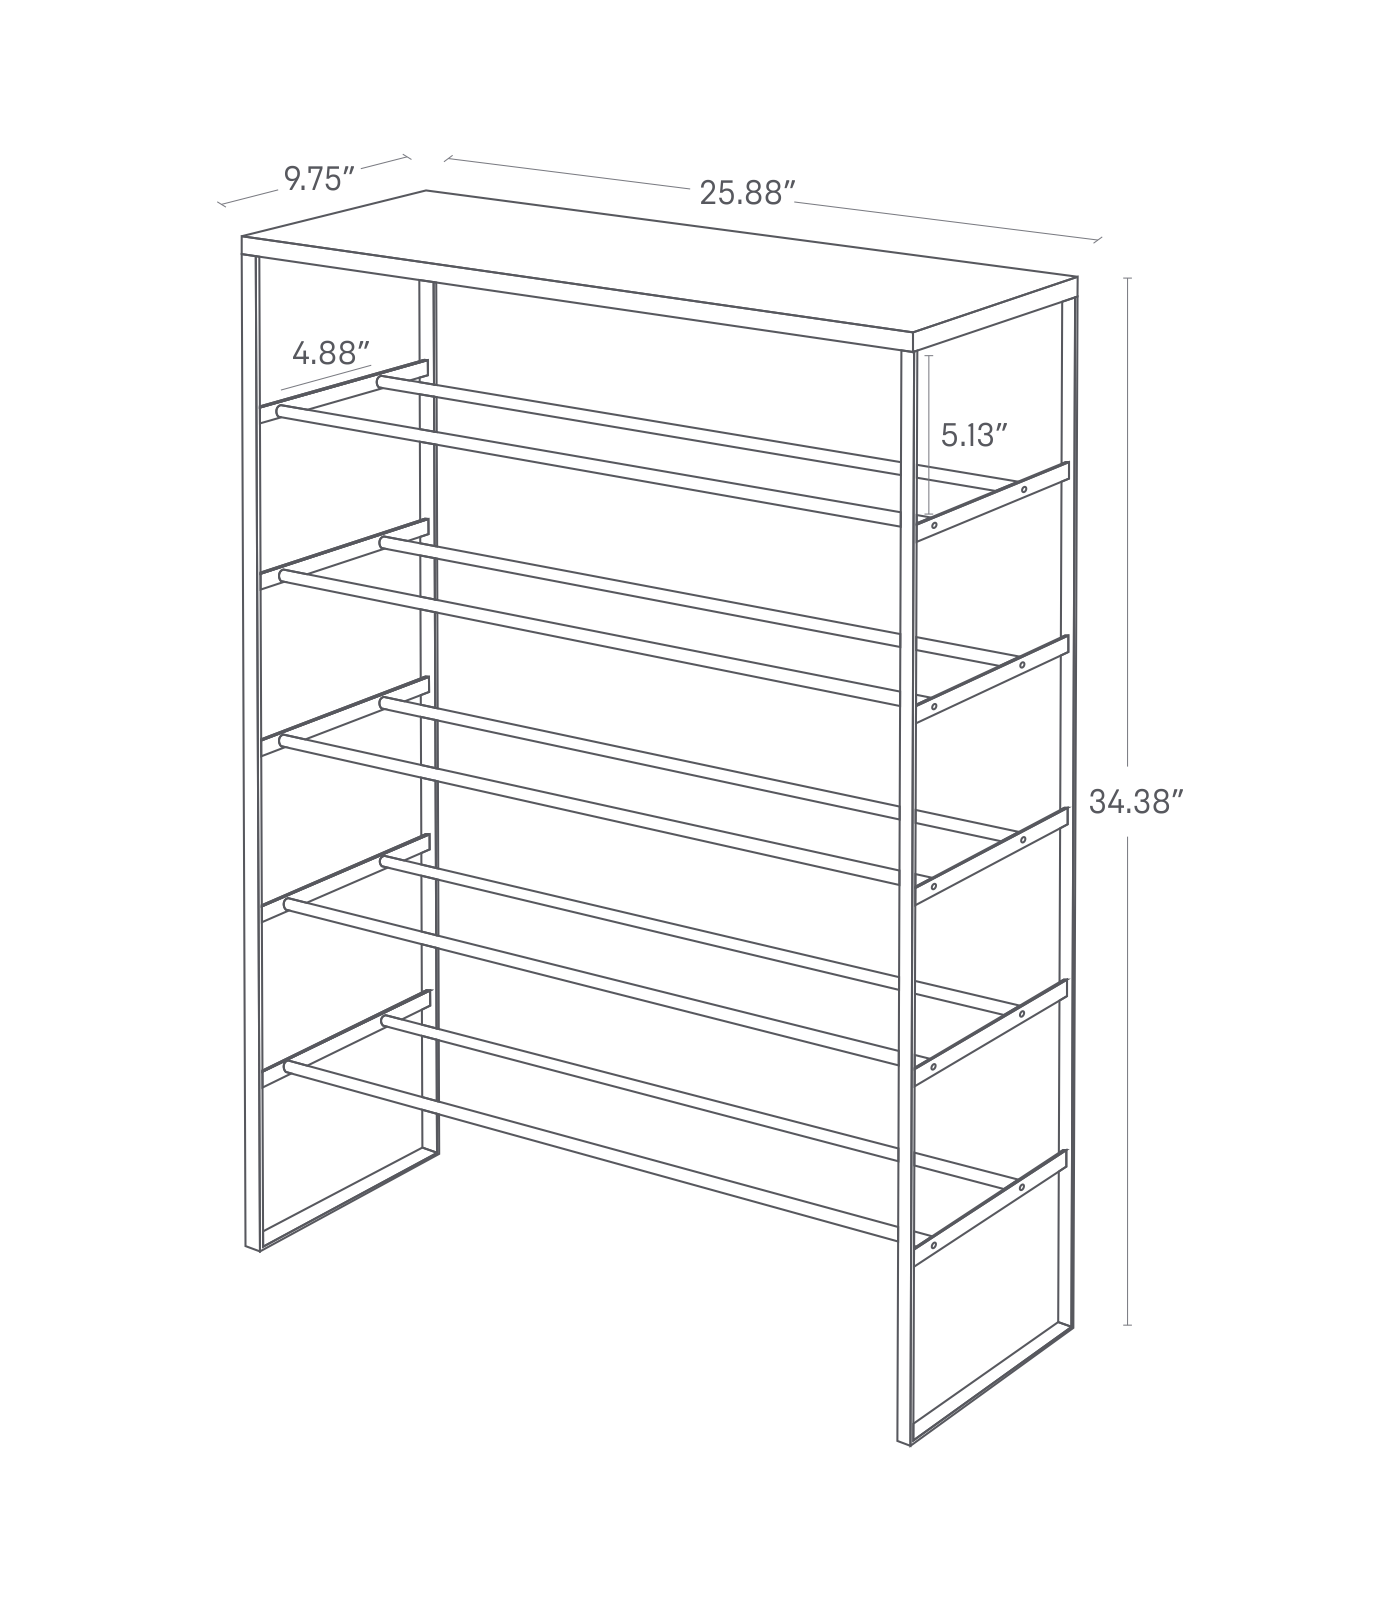 Dimension image for Six-Tier Shoe Rack showing a total height of 34.38